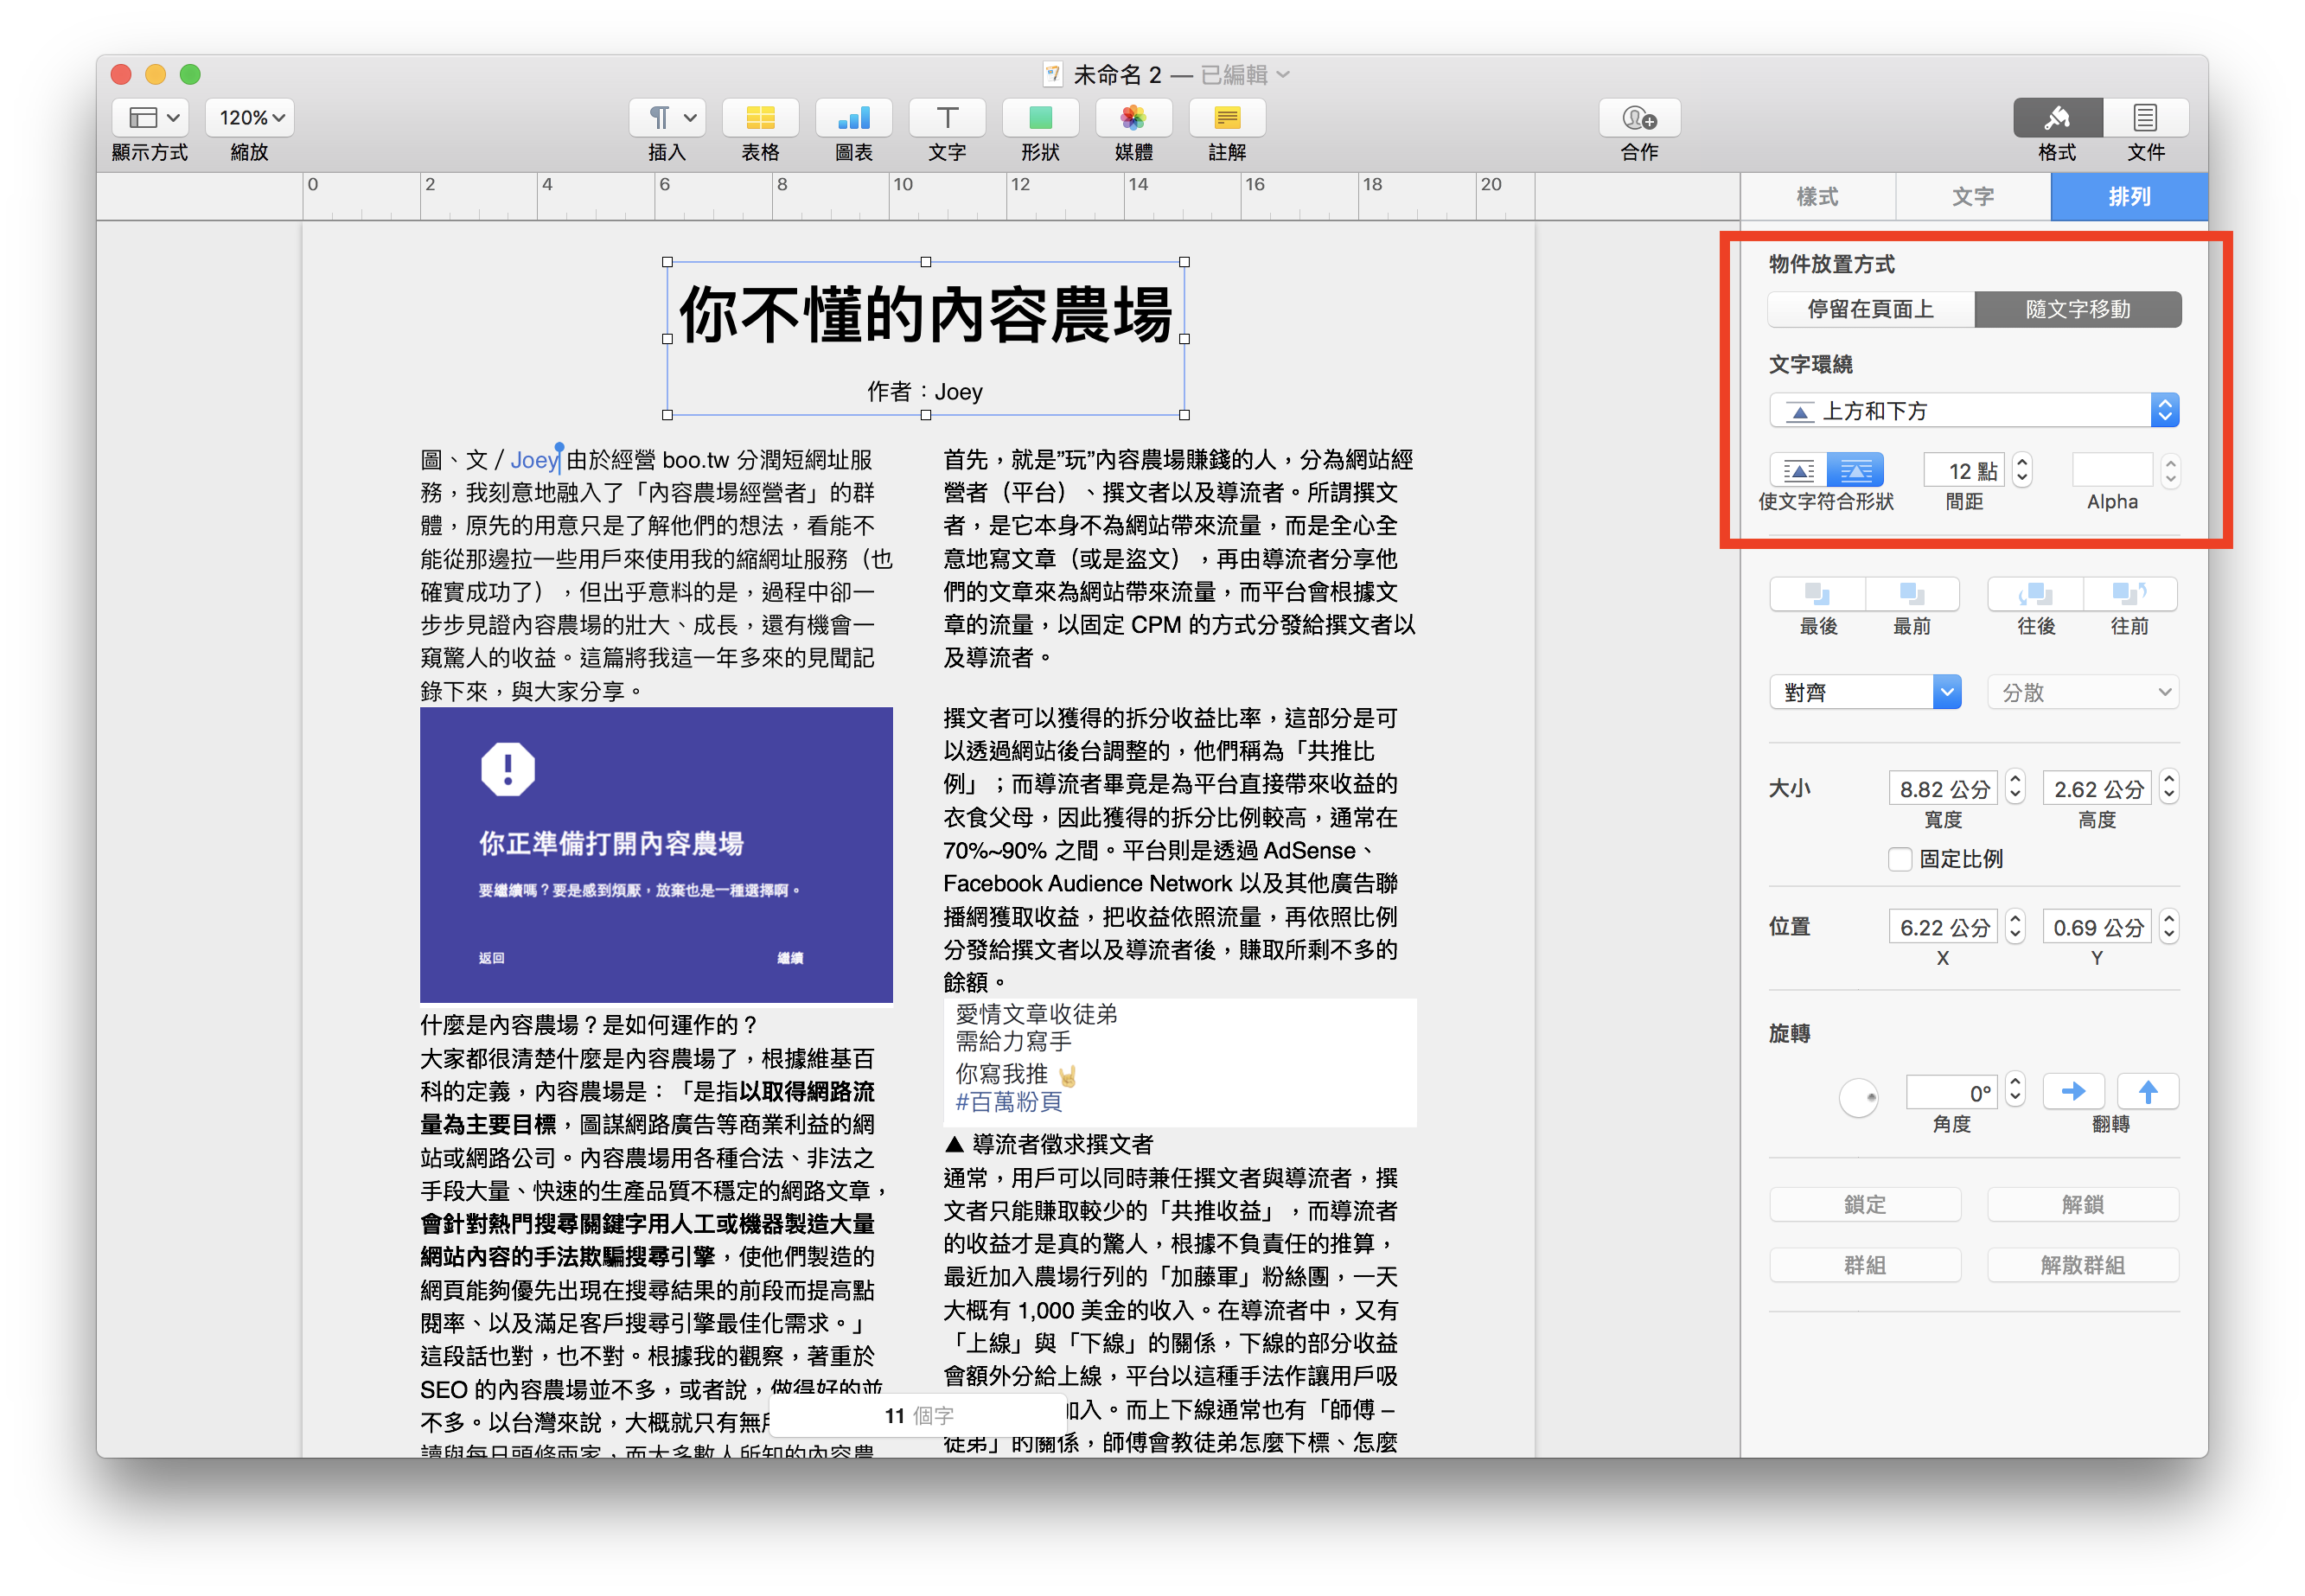 Pages教學：如何讓 Pages 文字分為兩欄（或更多欄）